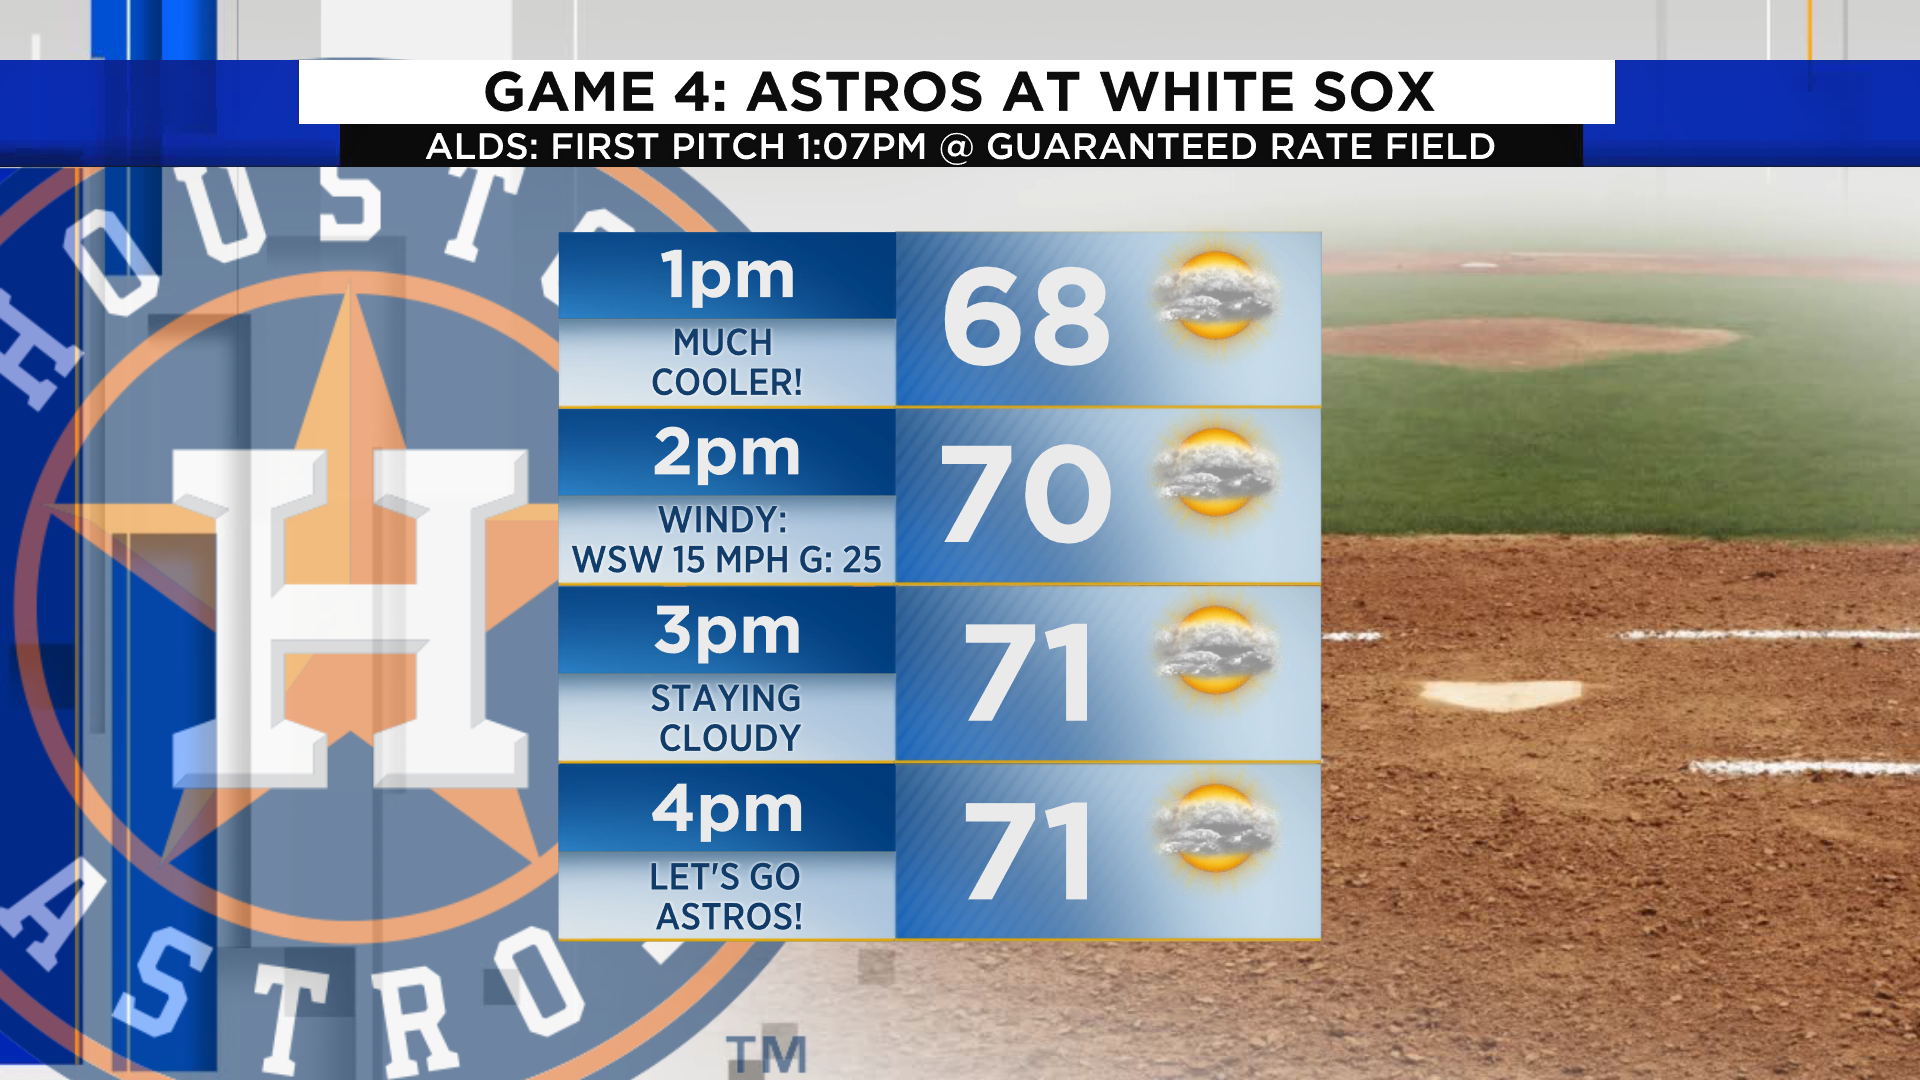 DELAYED Stormy weather postpones ALDS Game 4 between Houston Astros and Chicago White Sox